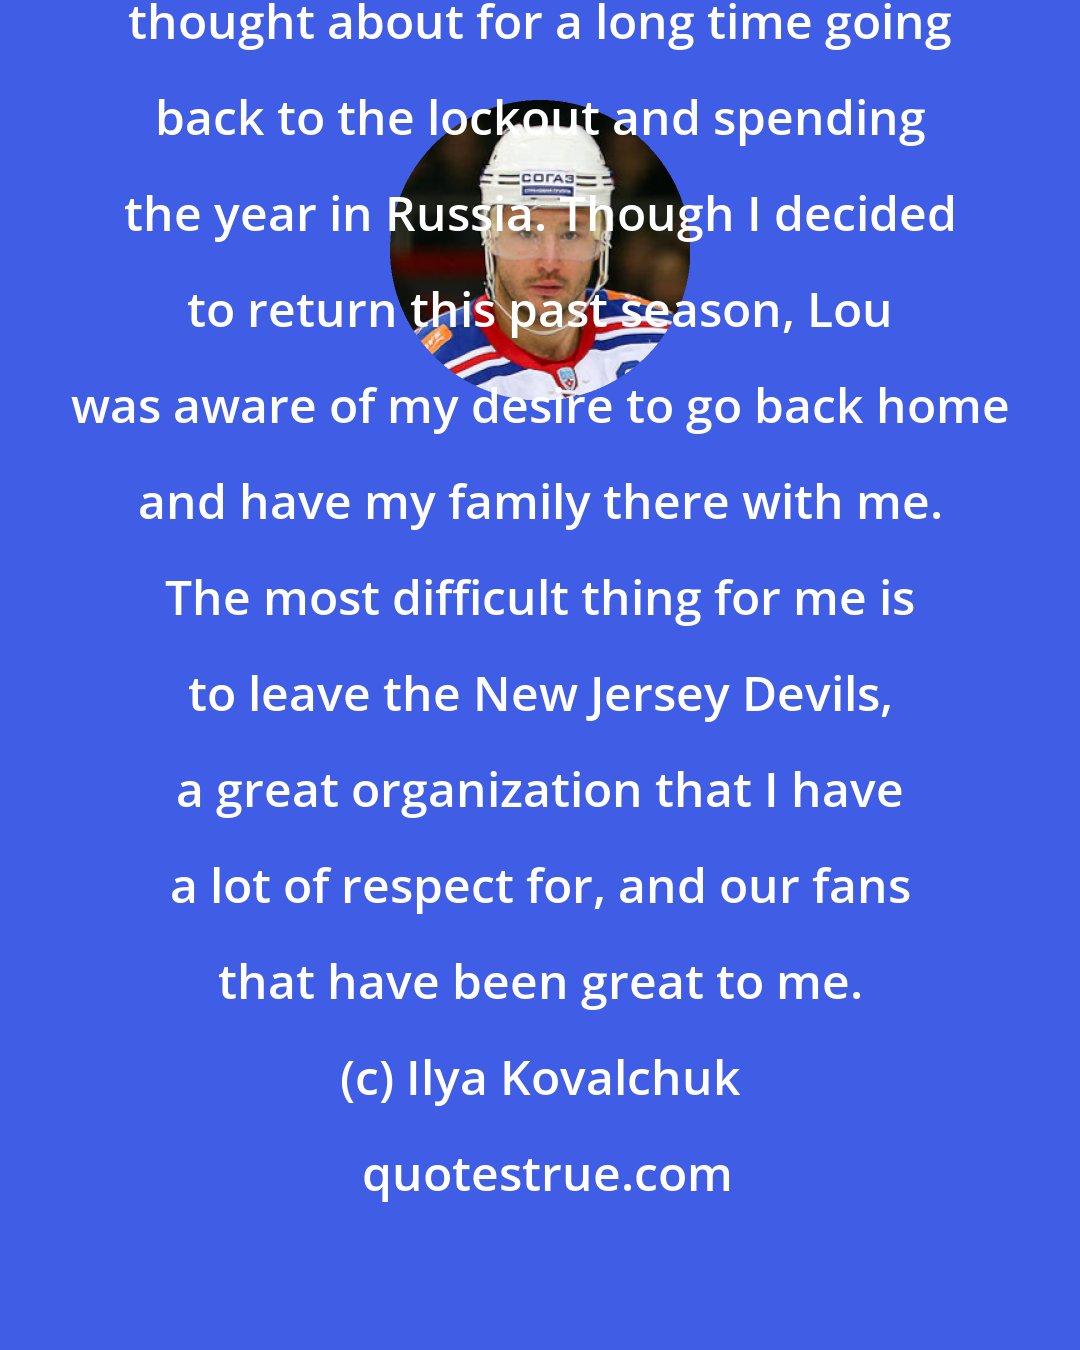 Ilya Kovalchuk: This decision was something I have thought about for a long time going back to the lockout and spending the year in Russia. Though I decided to return this past season, Lou was aware of my desire to go back home and have my family there with me. The most difficult thing for me is to leave the New Jersey Devils, a great organization that I have a lot of respect for, and our fans that have been great to me.